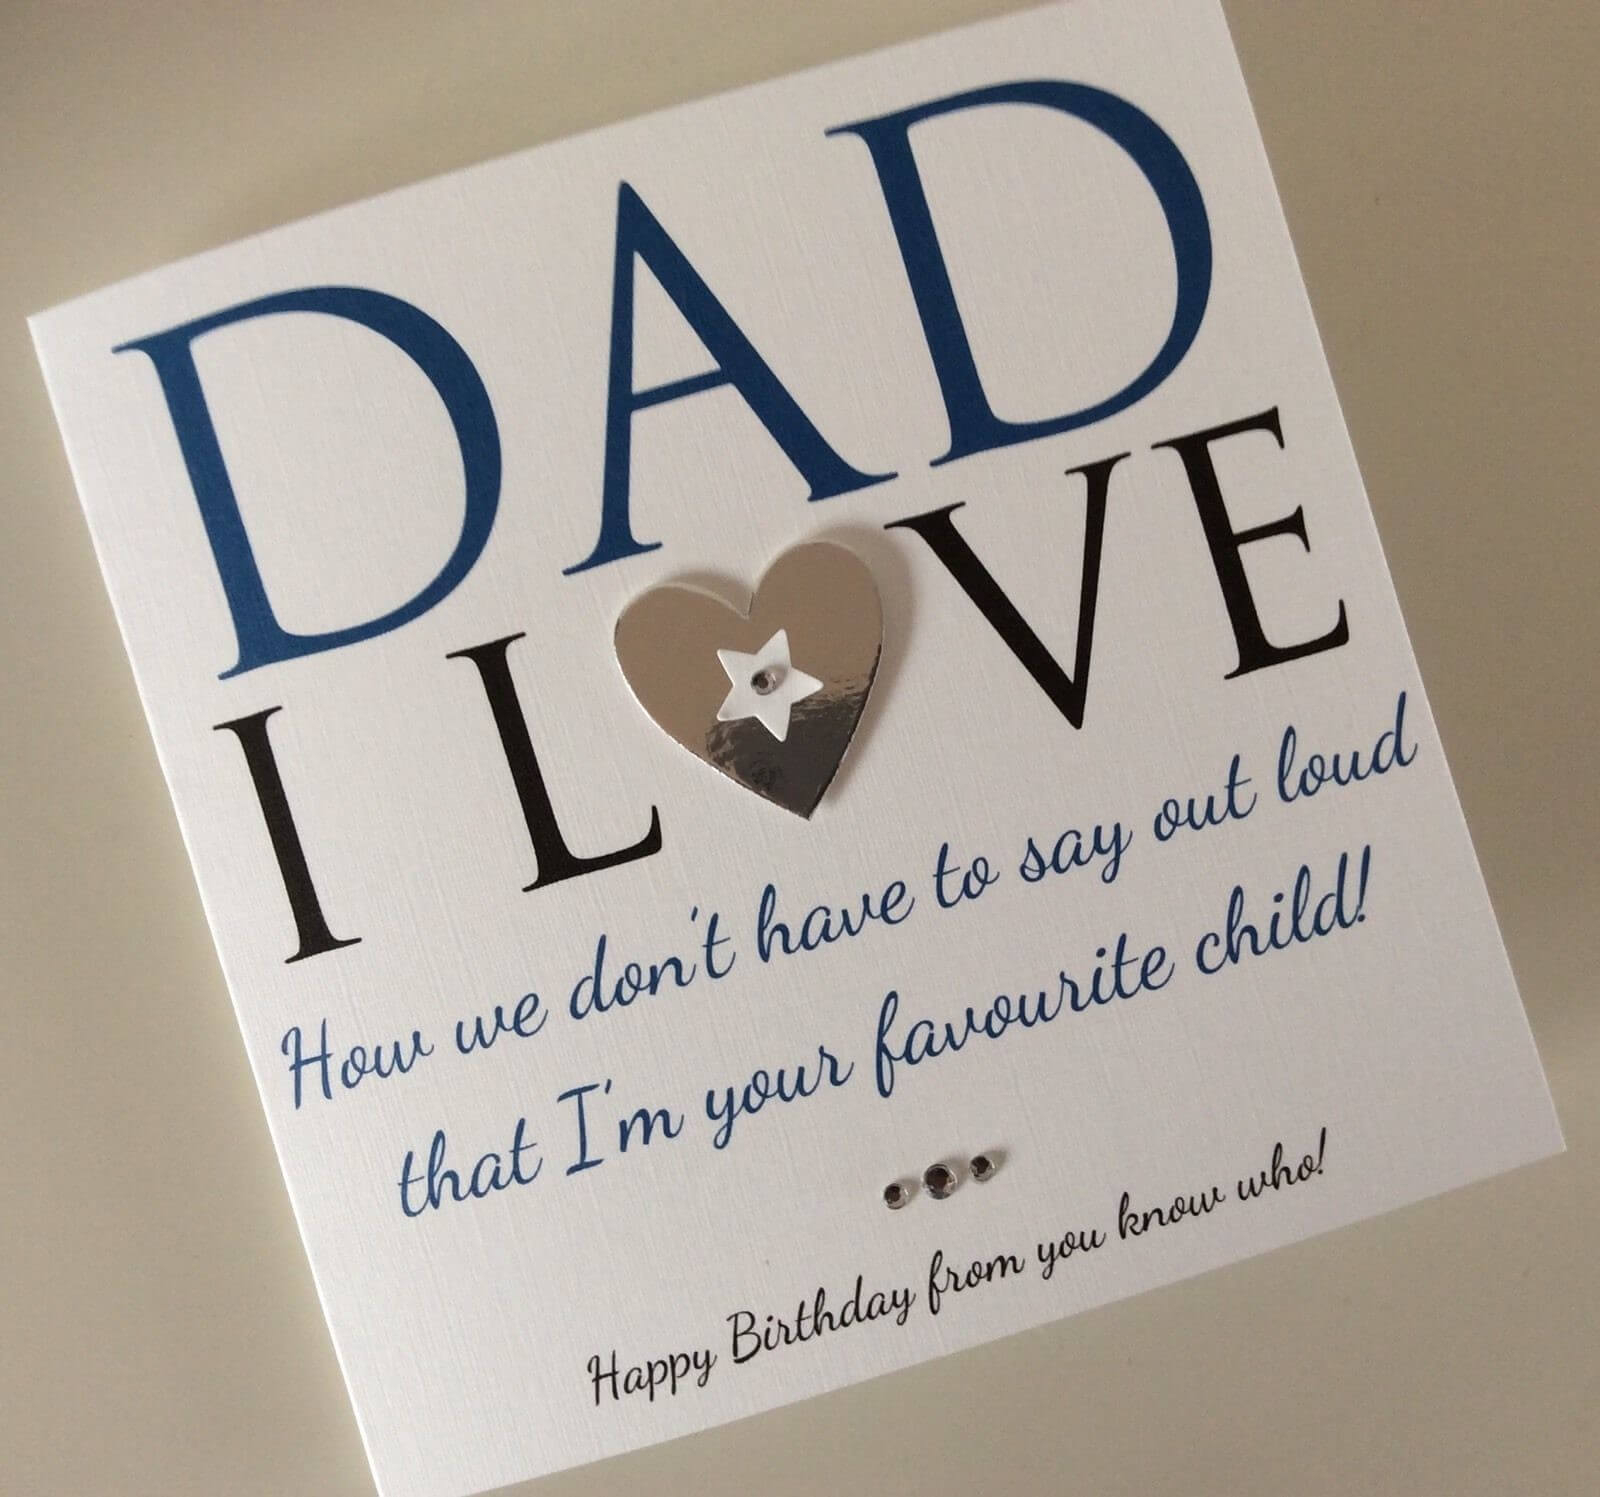 Ideas For Birthday Cards For Dads 98 Birthday Greetings Cards For Dad Dad Birthday Card From Kids